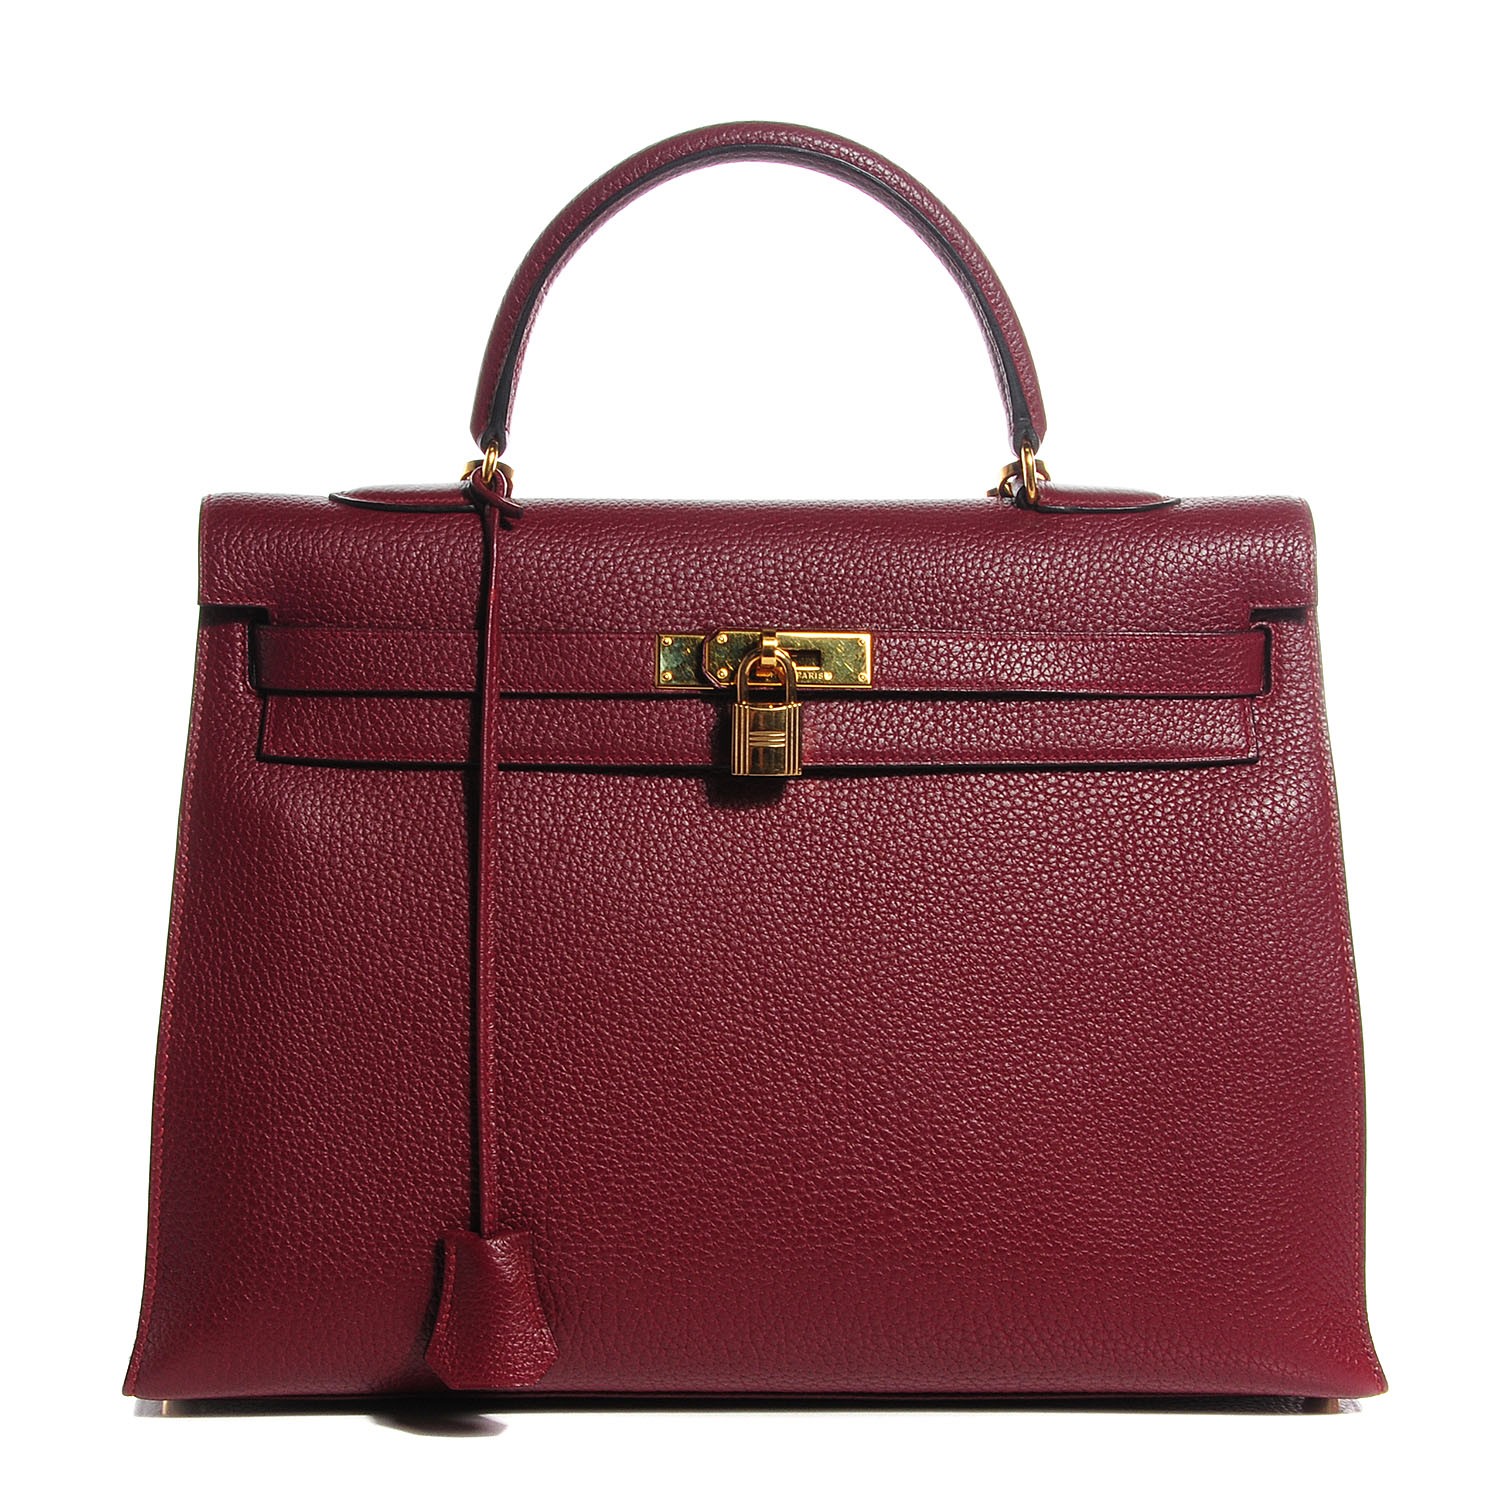 Hermès Kelly: Everything You Need to Know